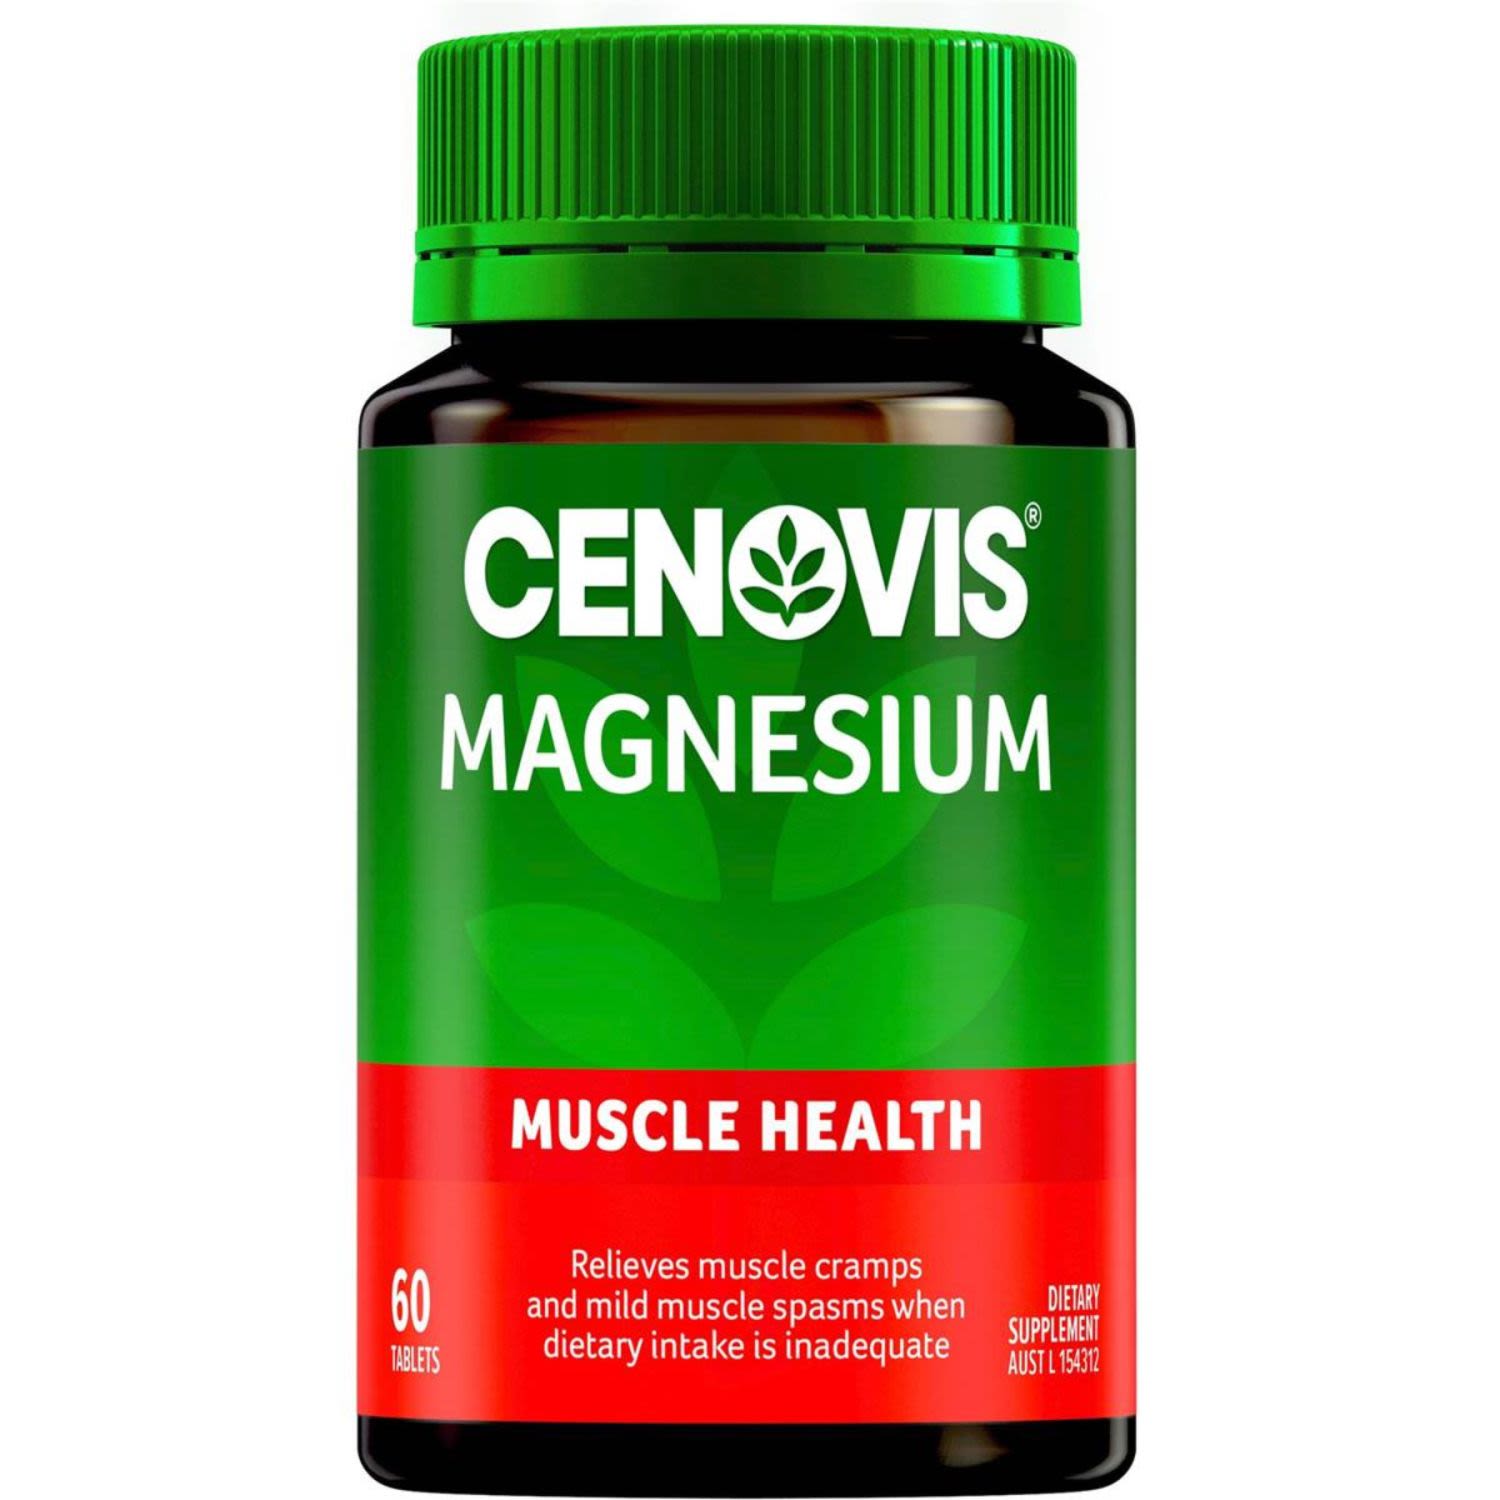 Cenovis Magnesium Muscle Health Tablets, 60 Each